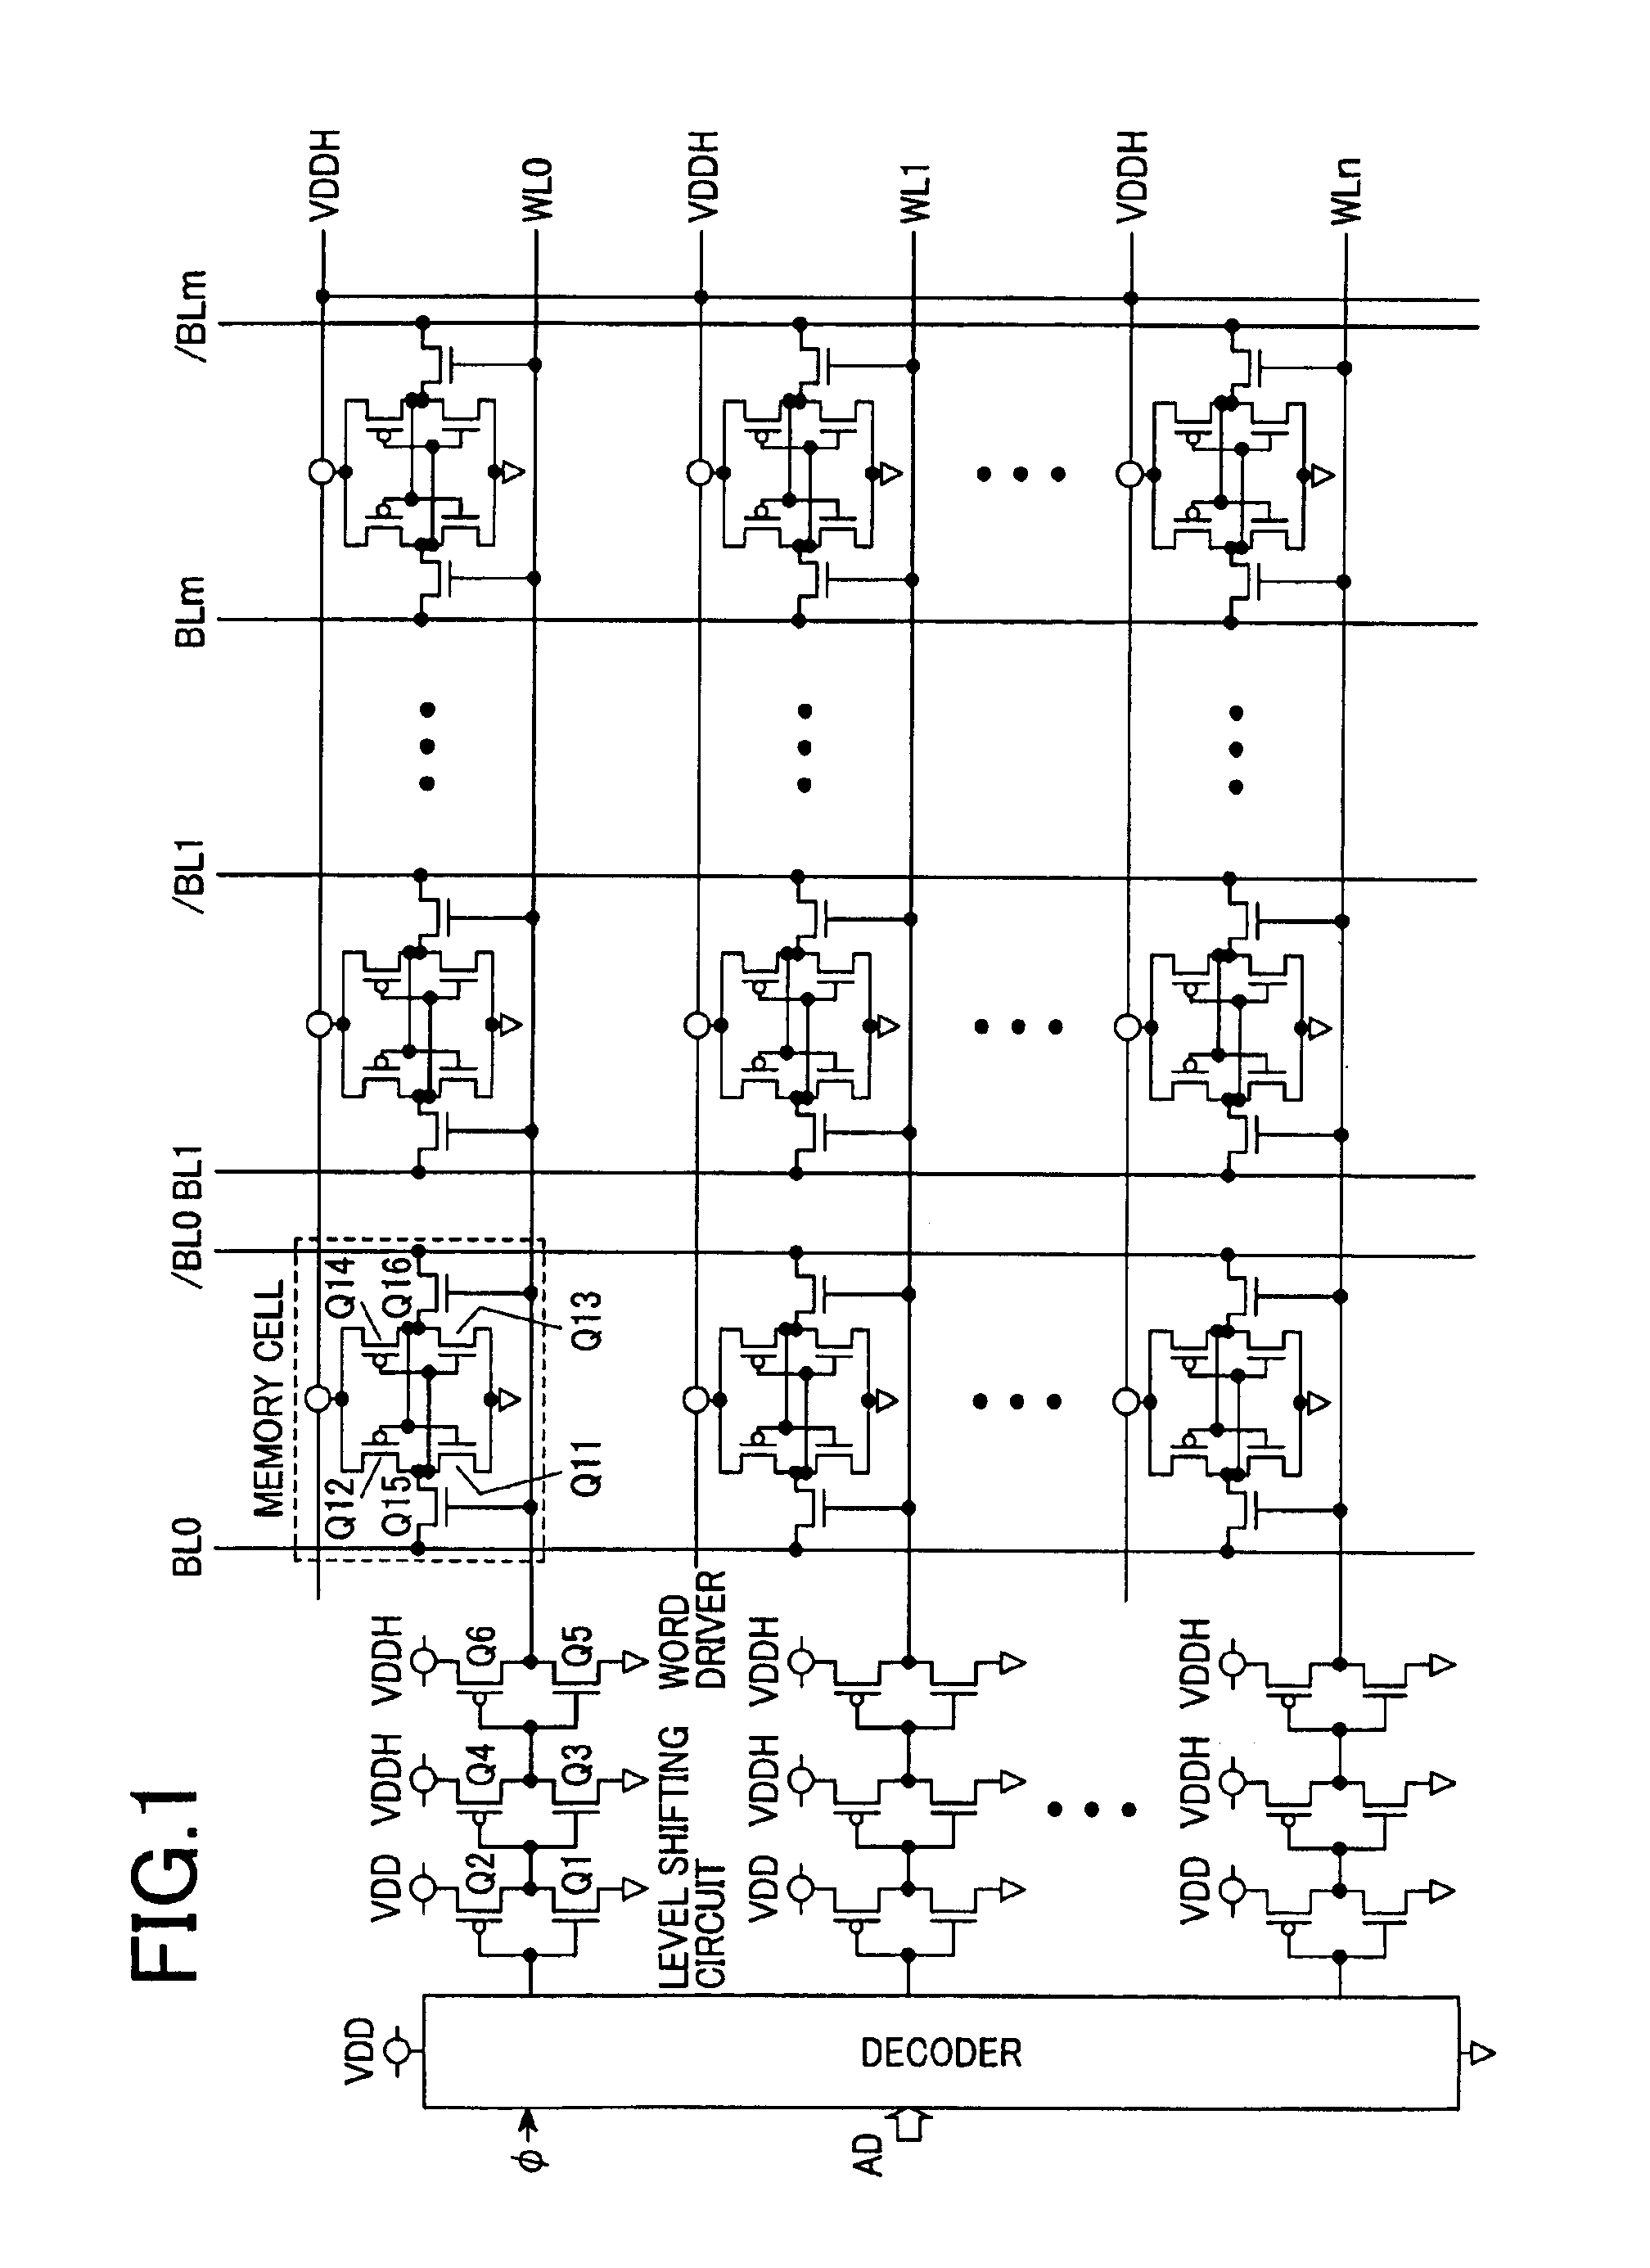 Semiconductor integrated circuit device